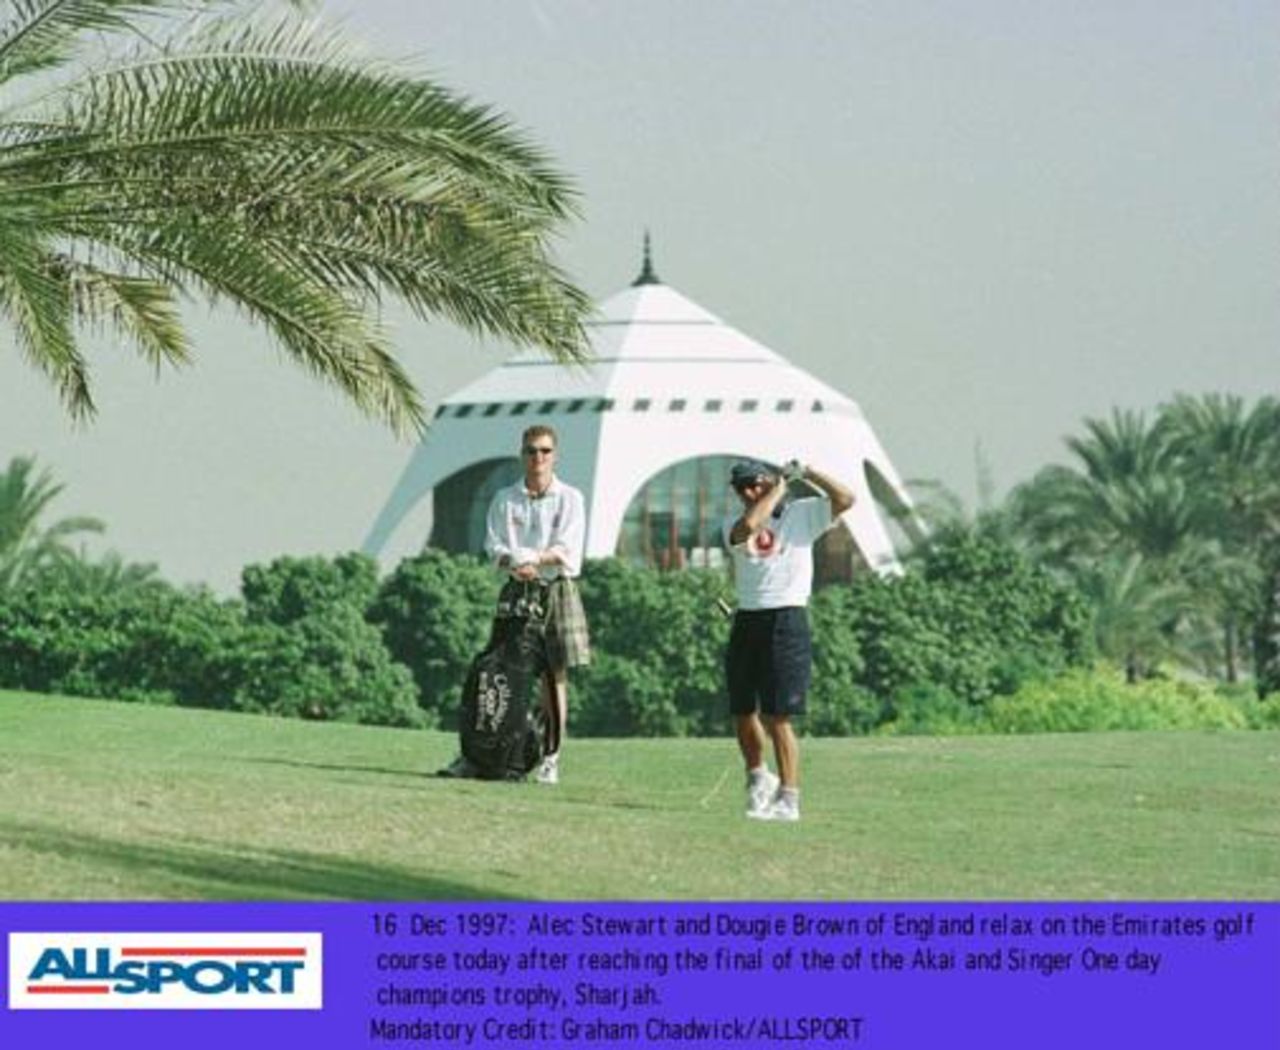 Champion's Trophy, Dec 1997 England's Dougie Brown and Alec Stewart relax on the golf course as they await the result of the India-West Indies game